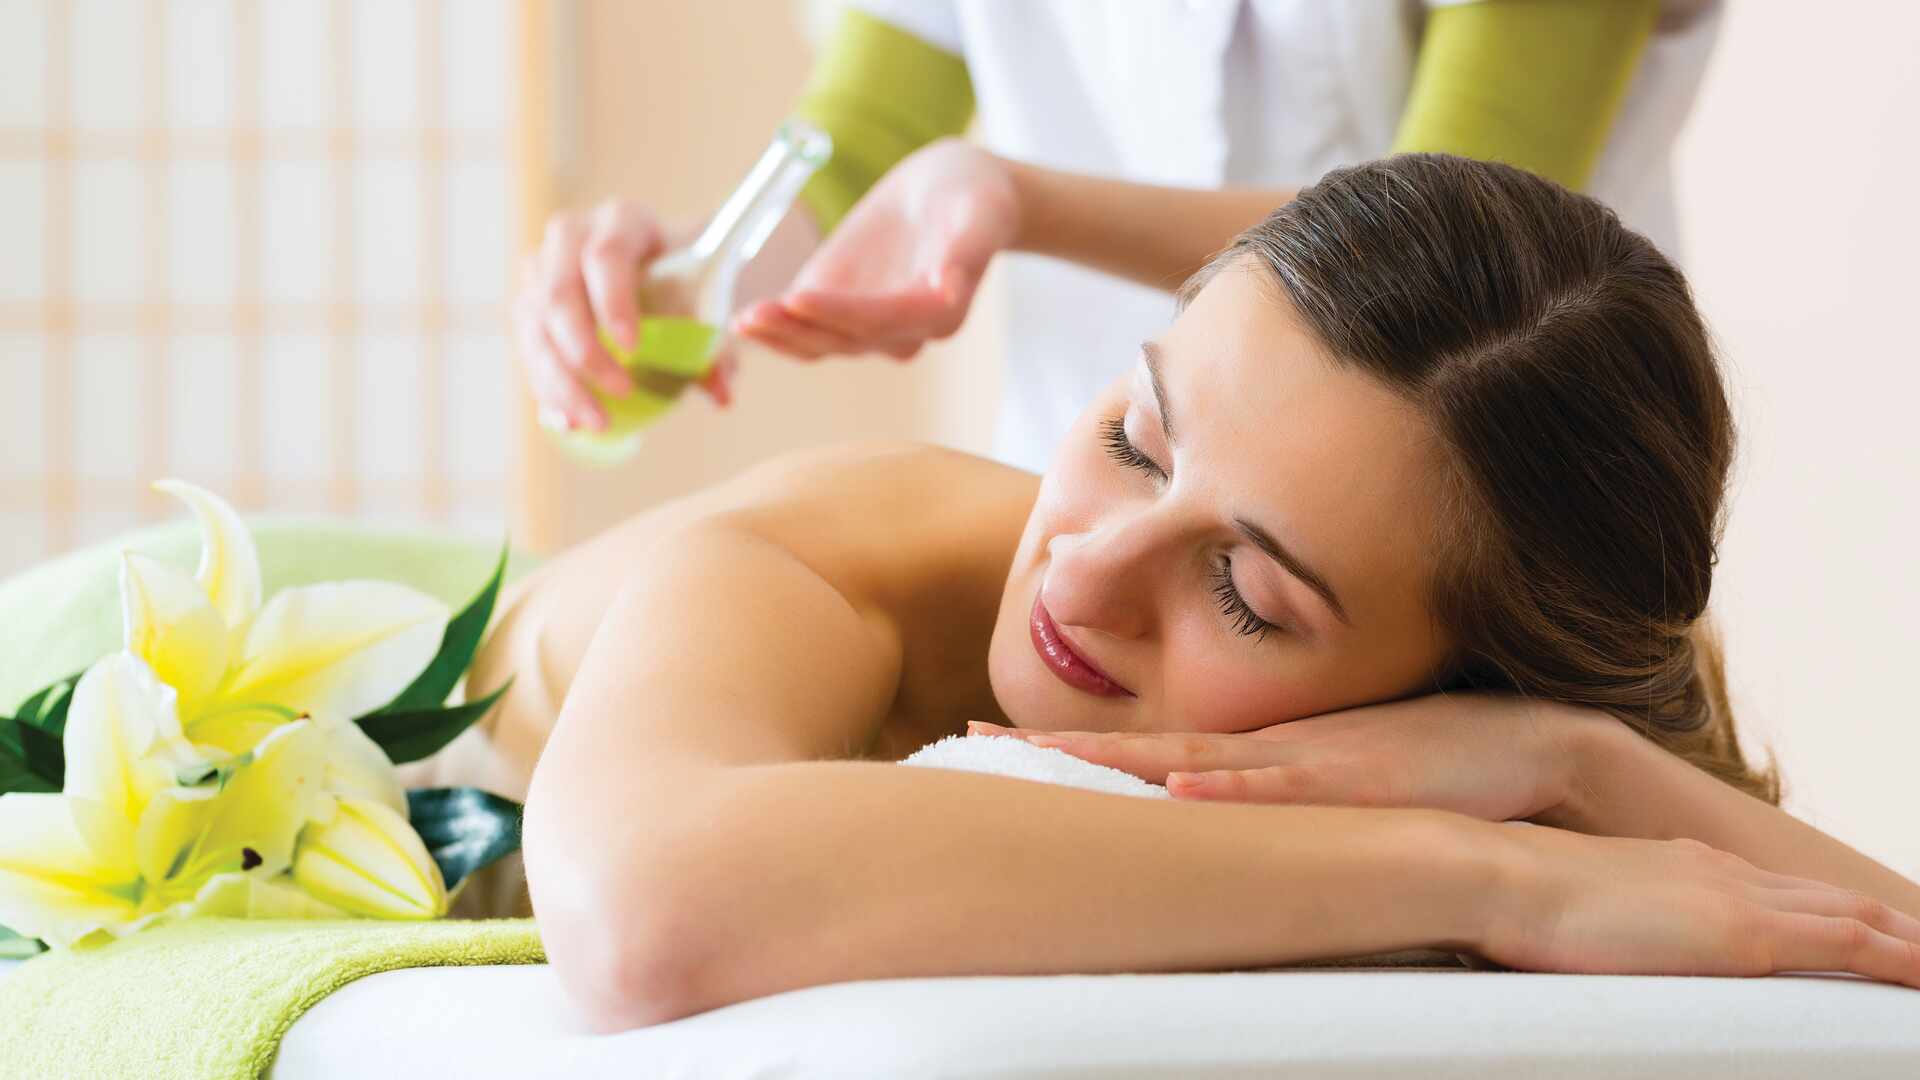 Image of massage in spa